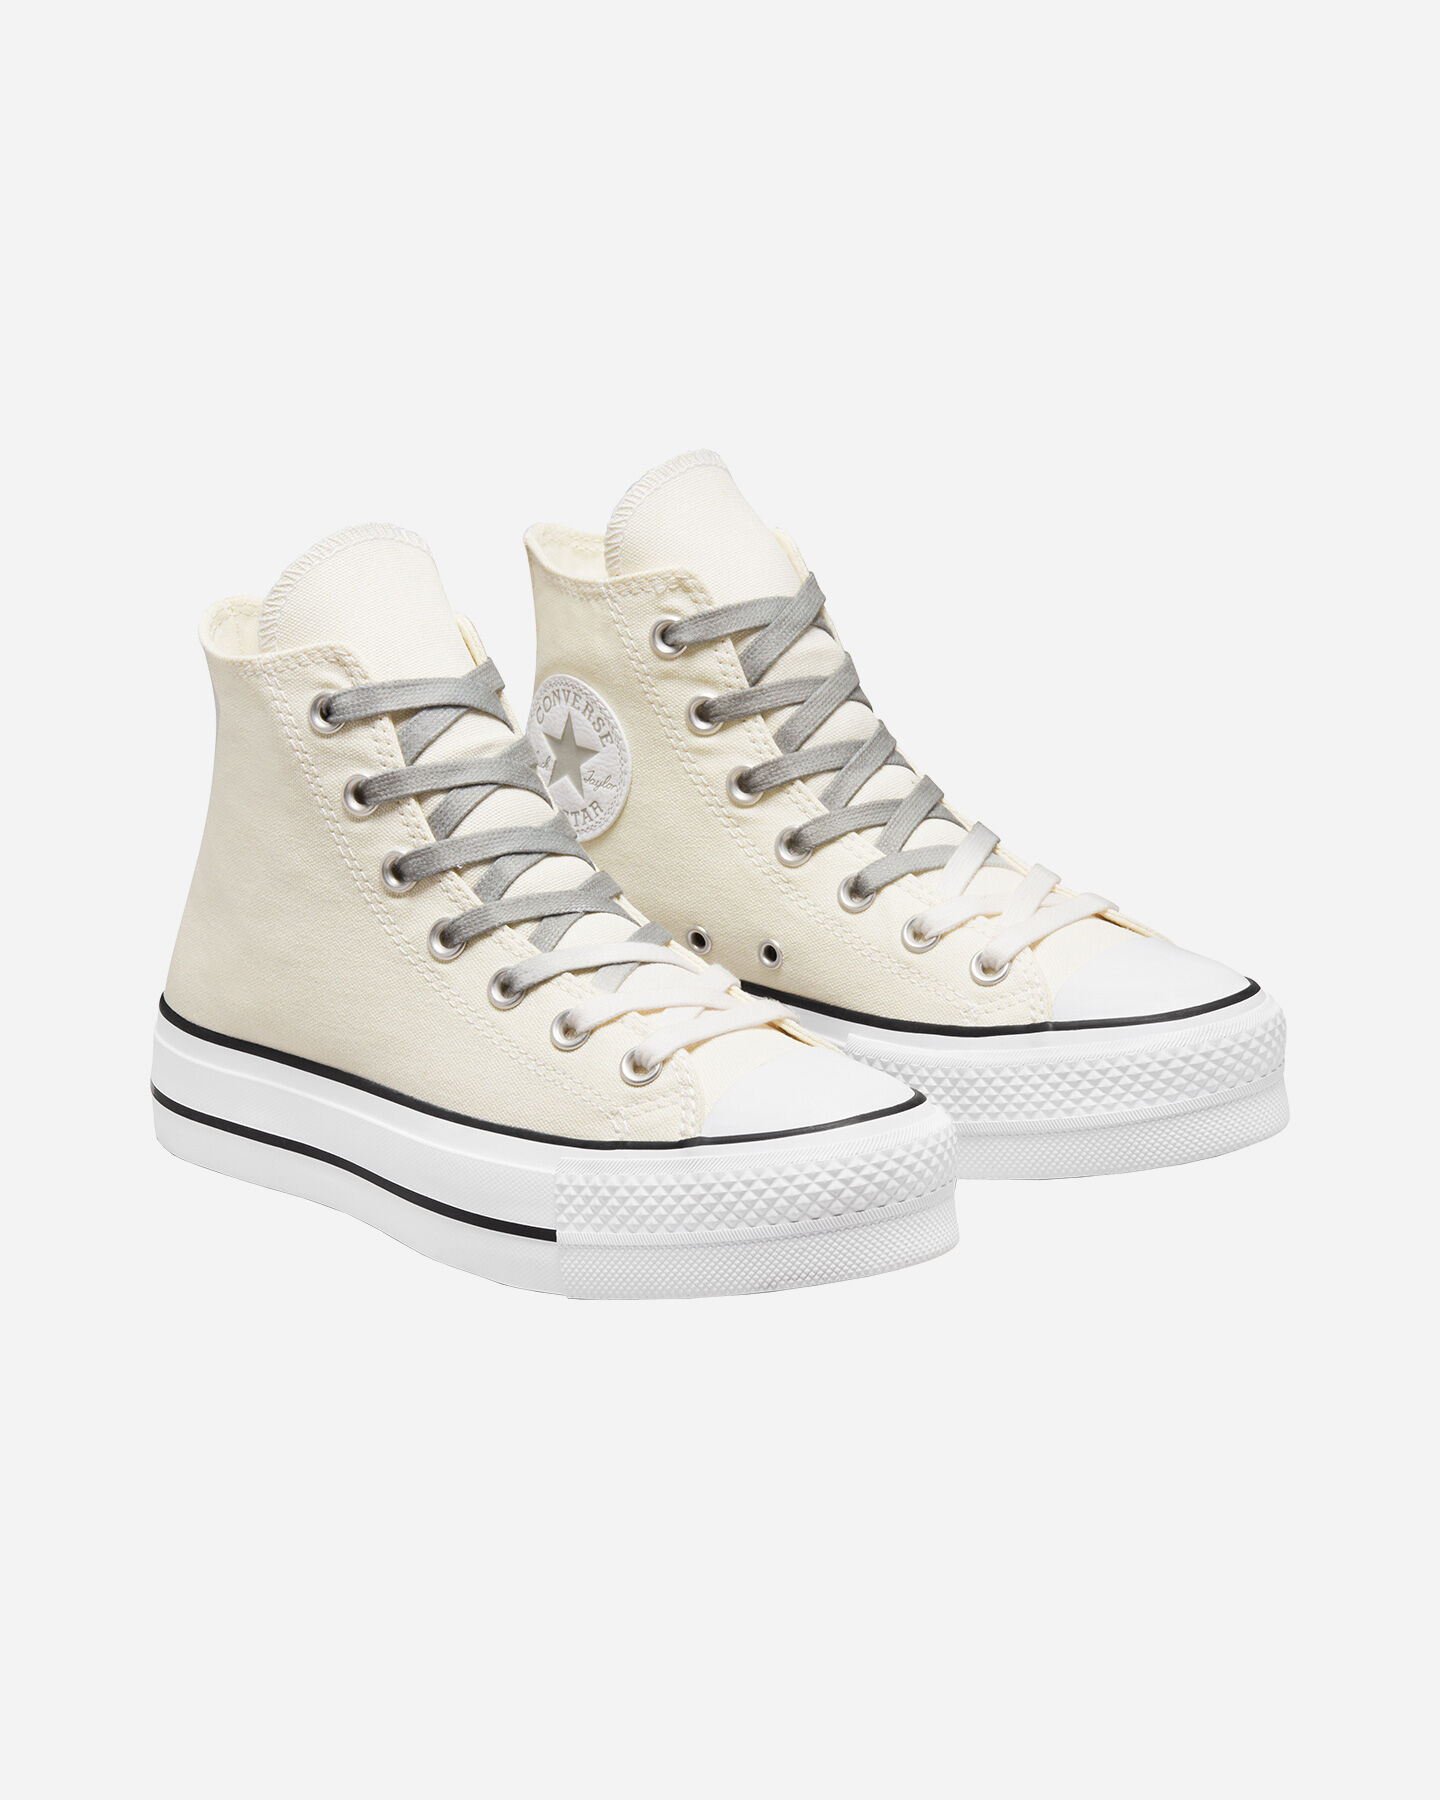  Scarpe sneakers CONVERSE CHUCK TAYLOR ALL STAR LIFT HIGH PLATFORM W S5403002|281|10 scatto 1